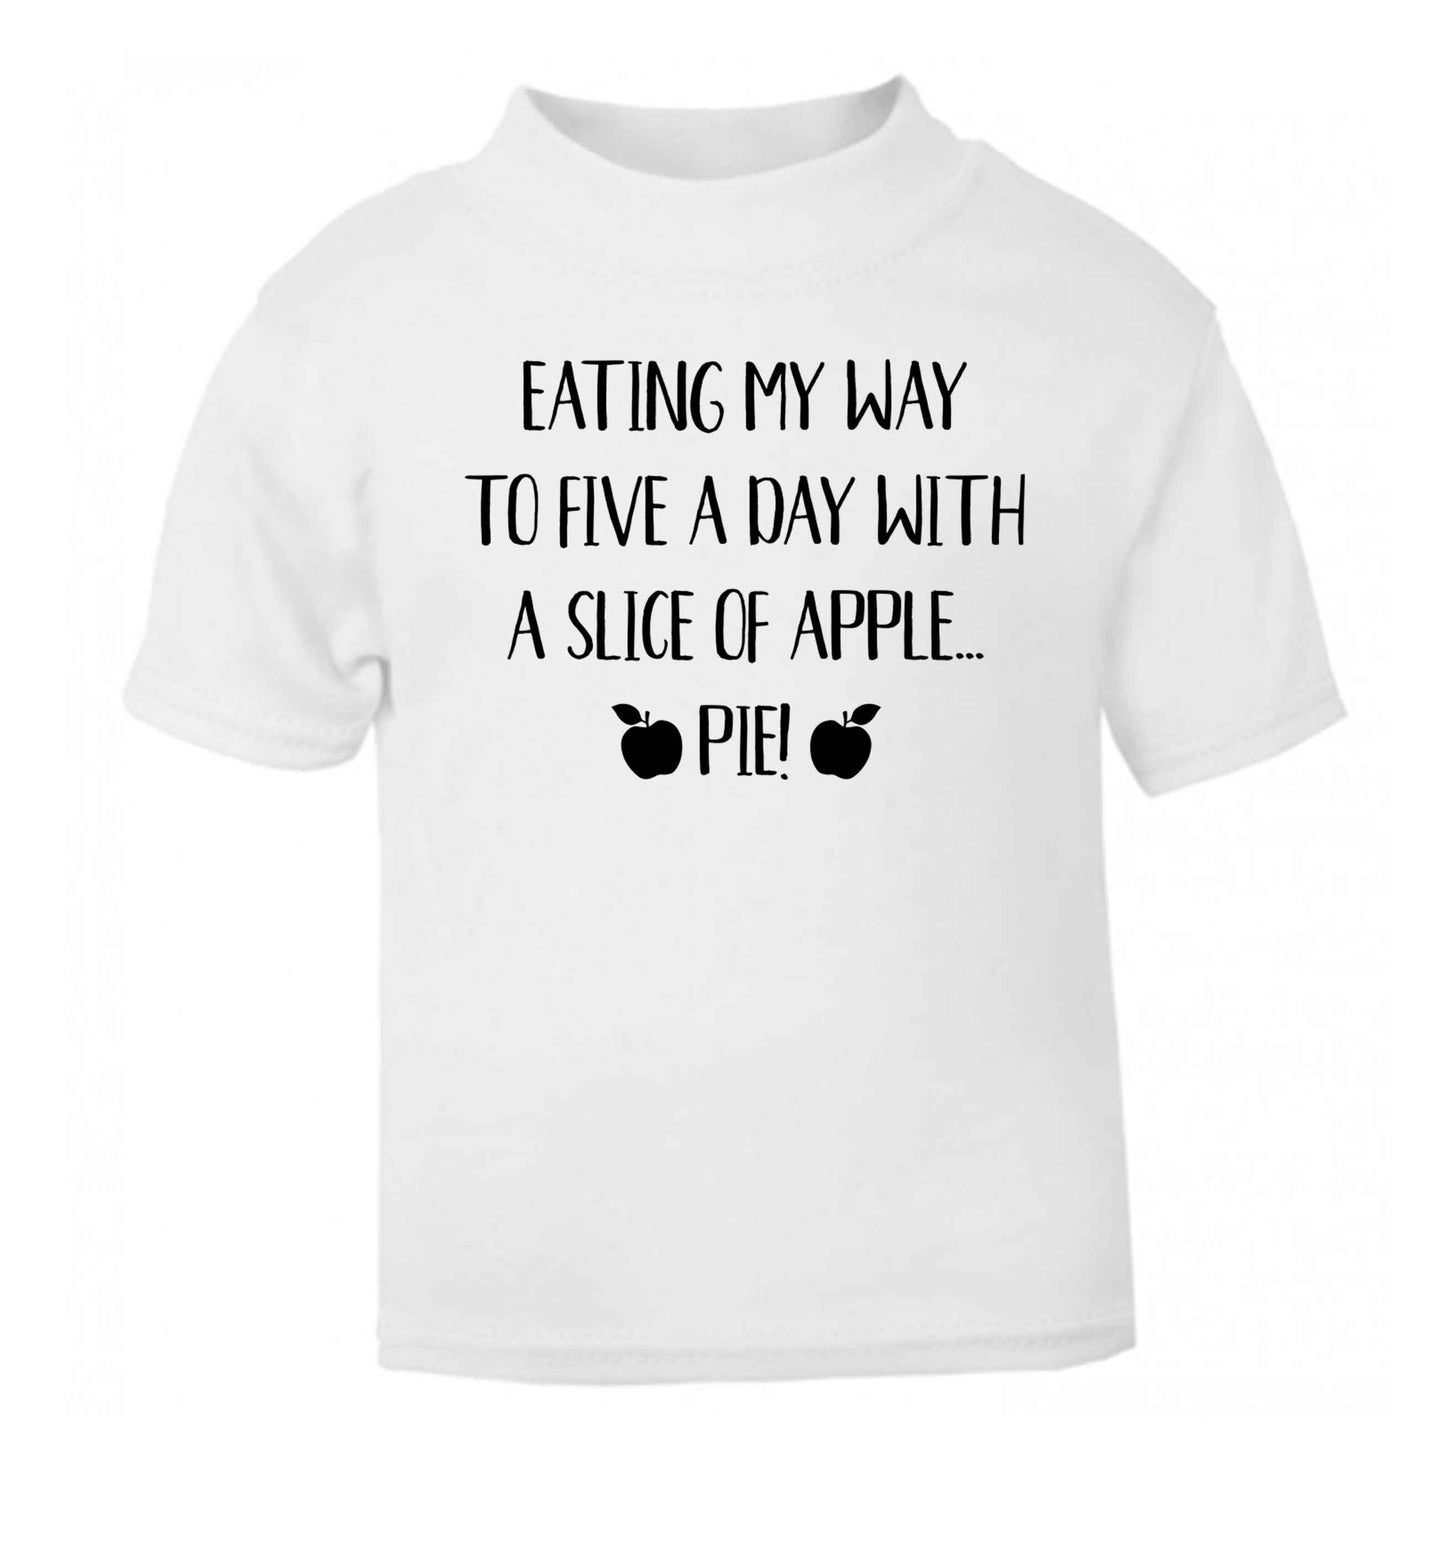 Eating my way to five a day with a slice of apple pie white Baby Toddler Tshirt 2 Years